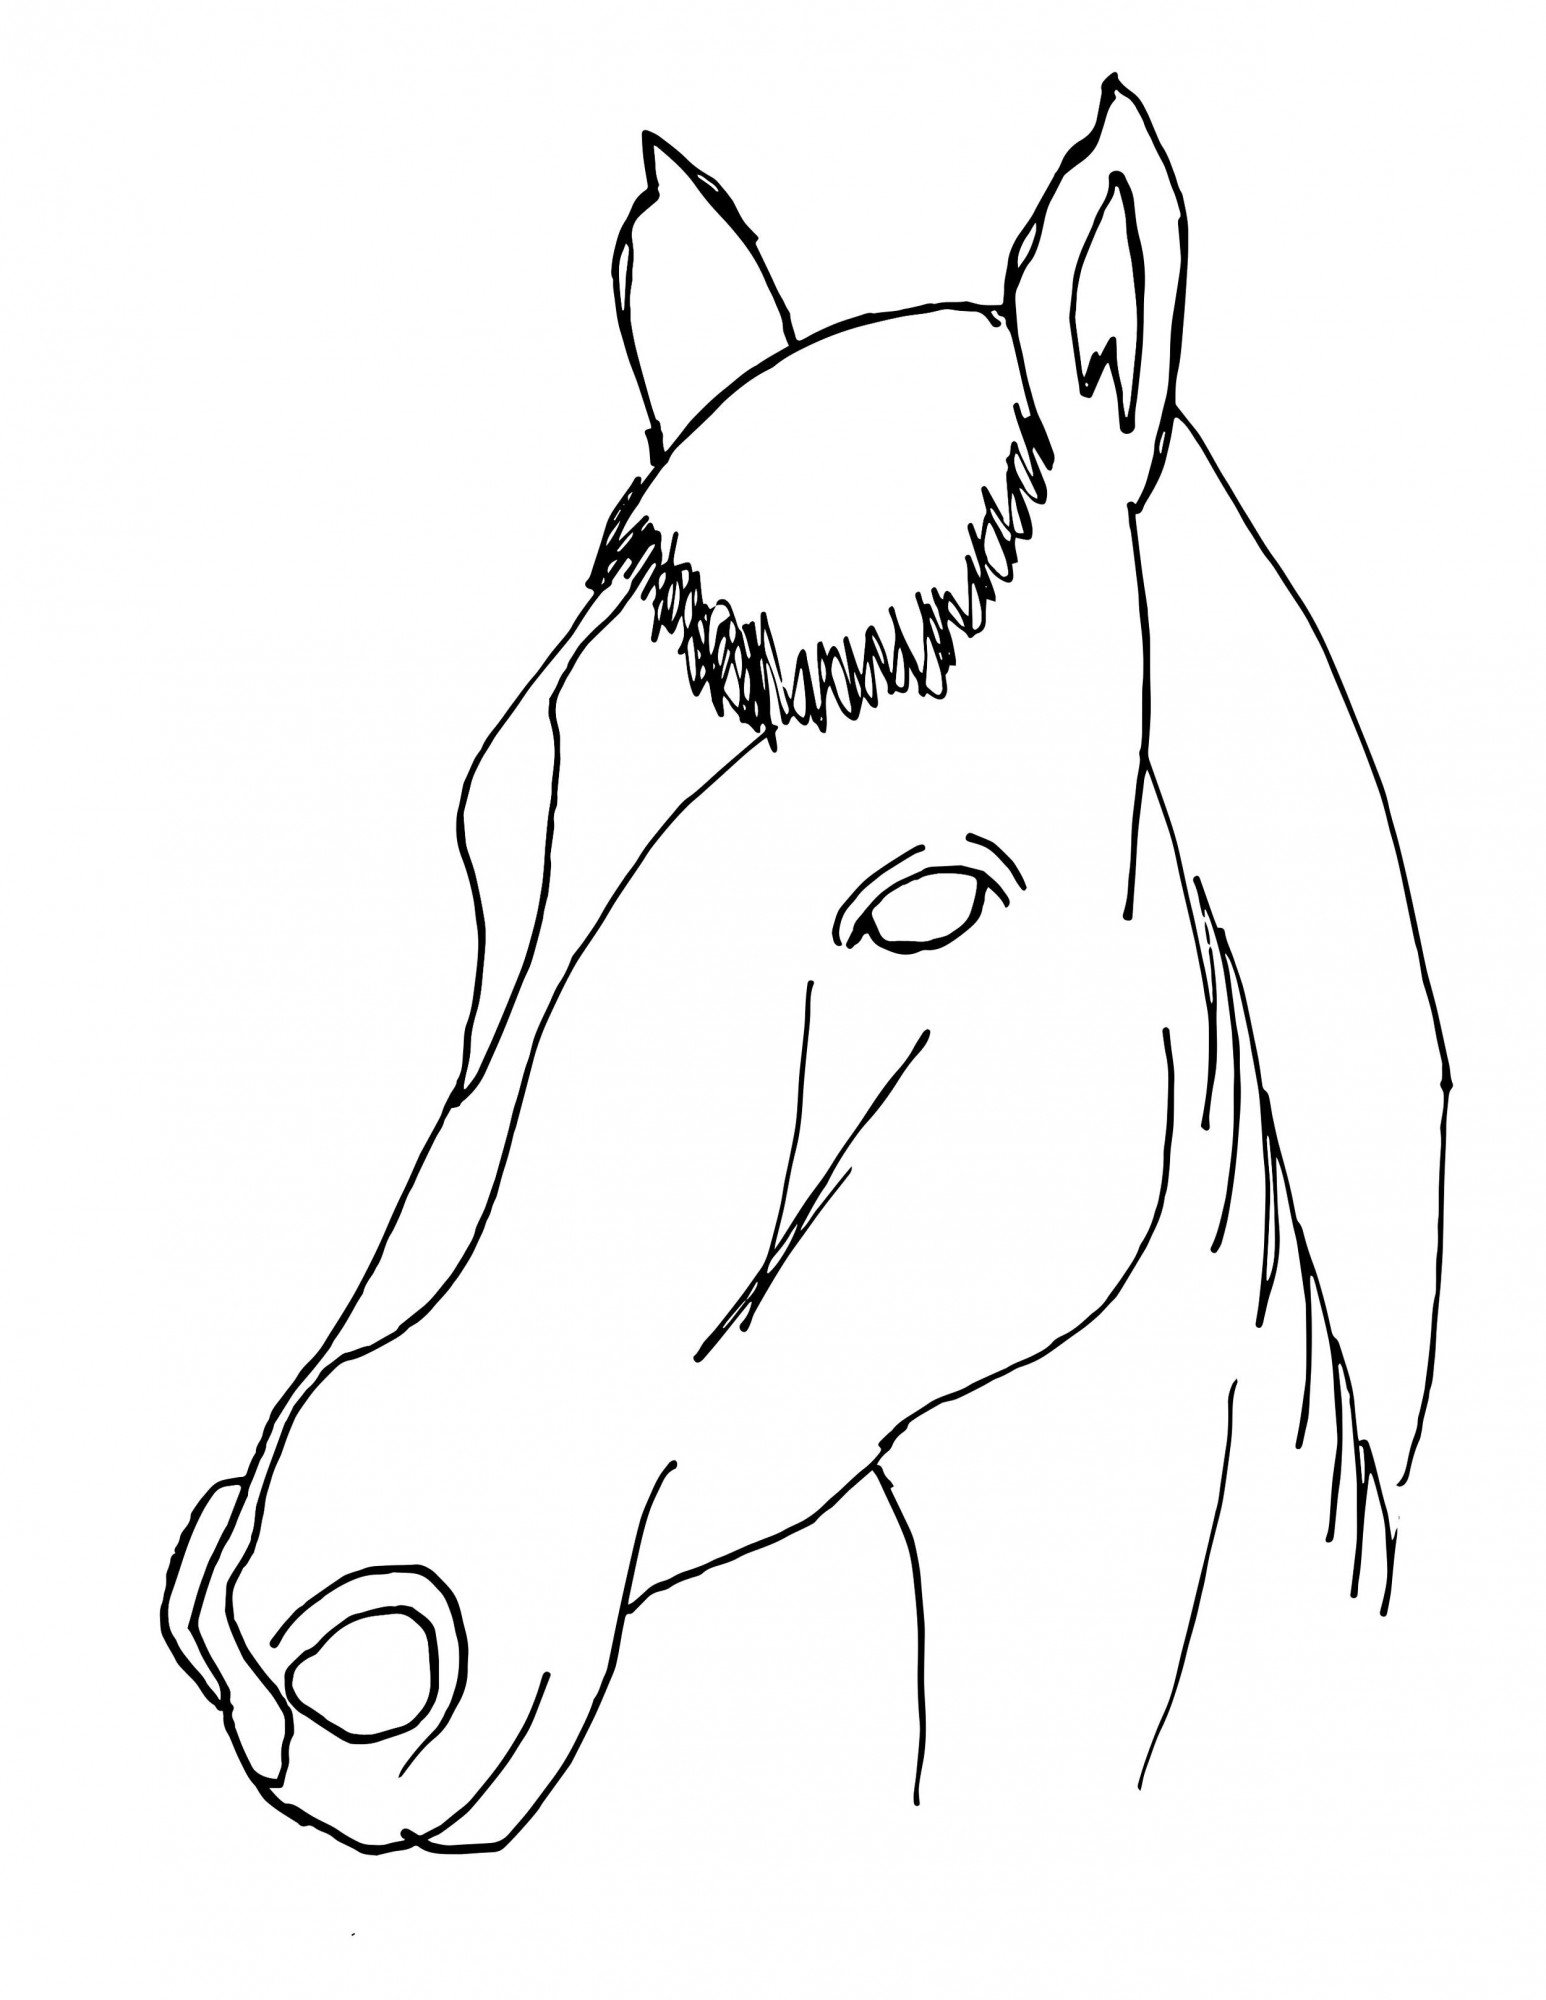 Horse "Bonnie" - black and white outline for coloring